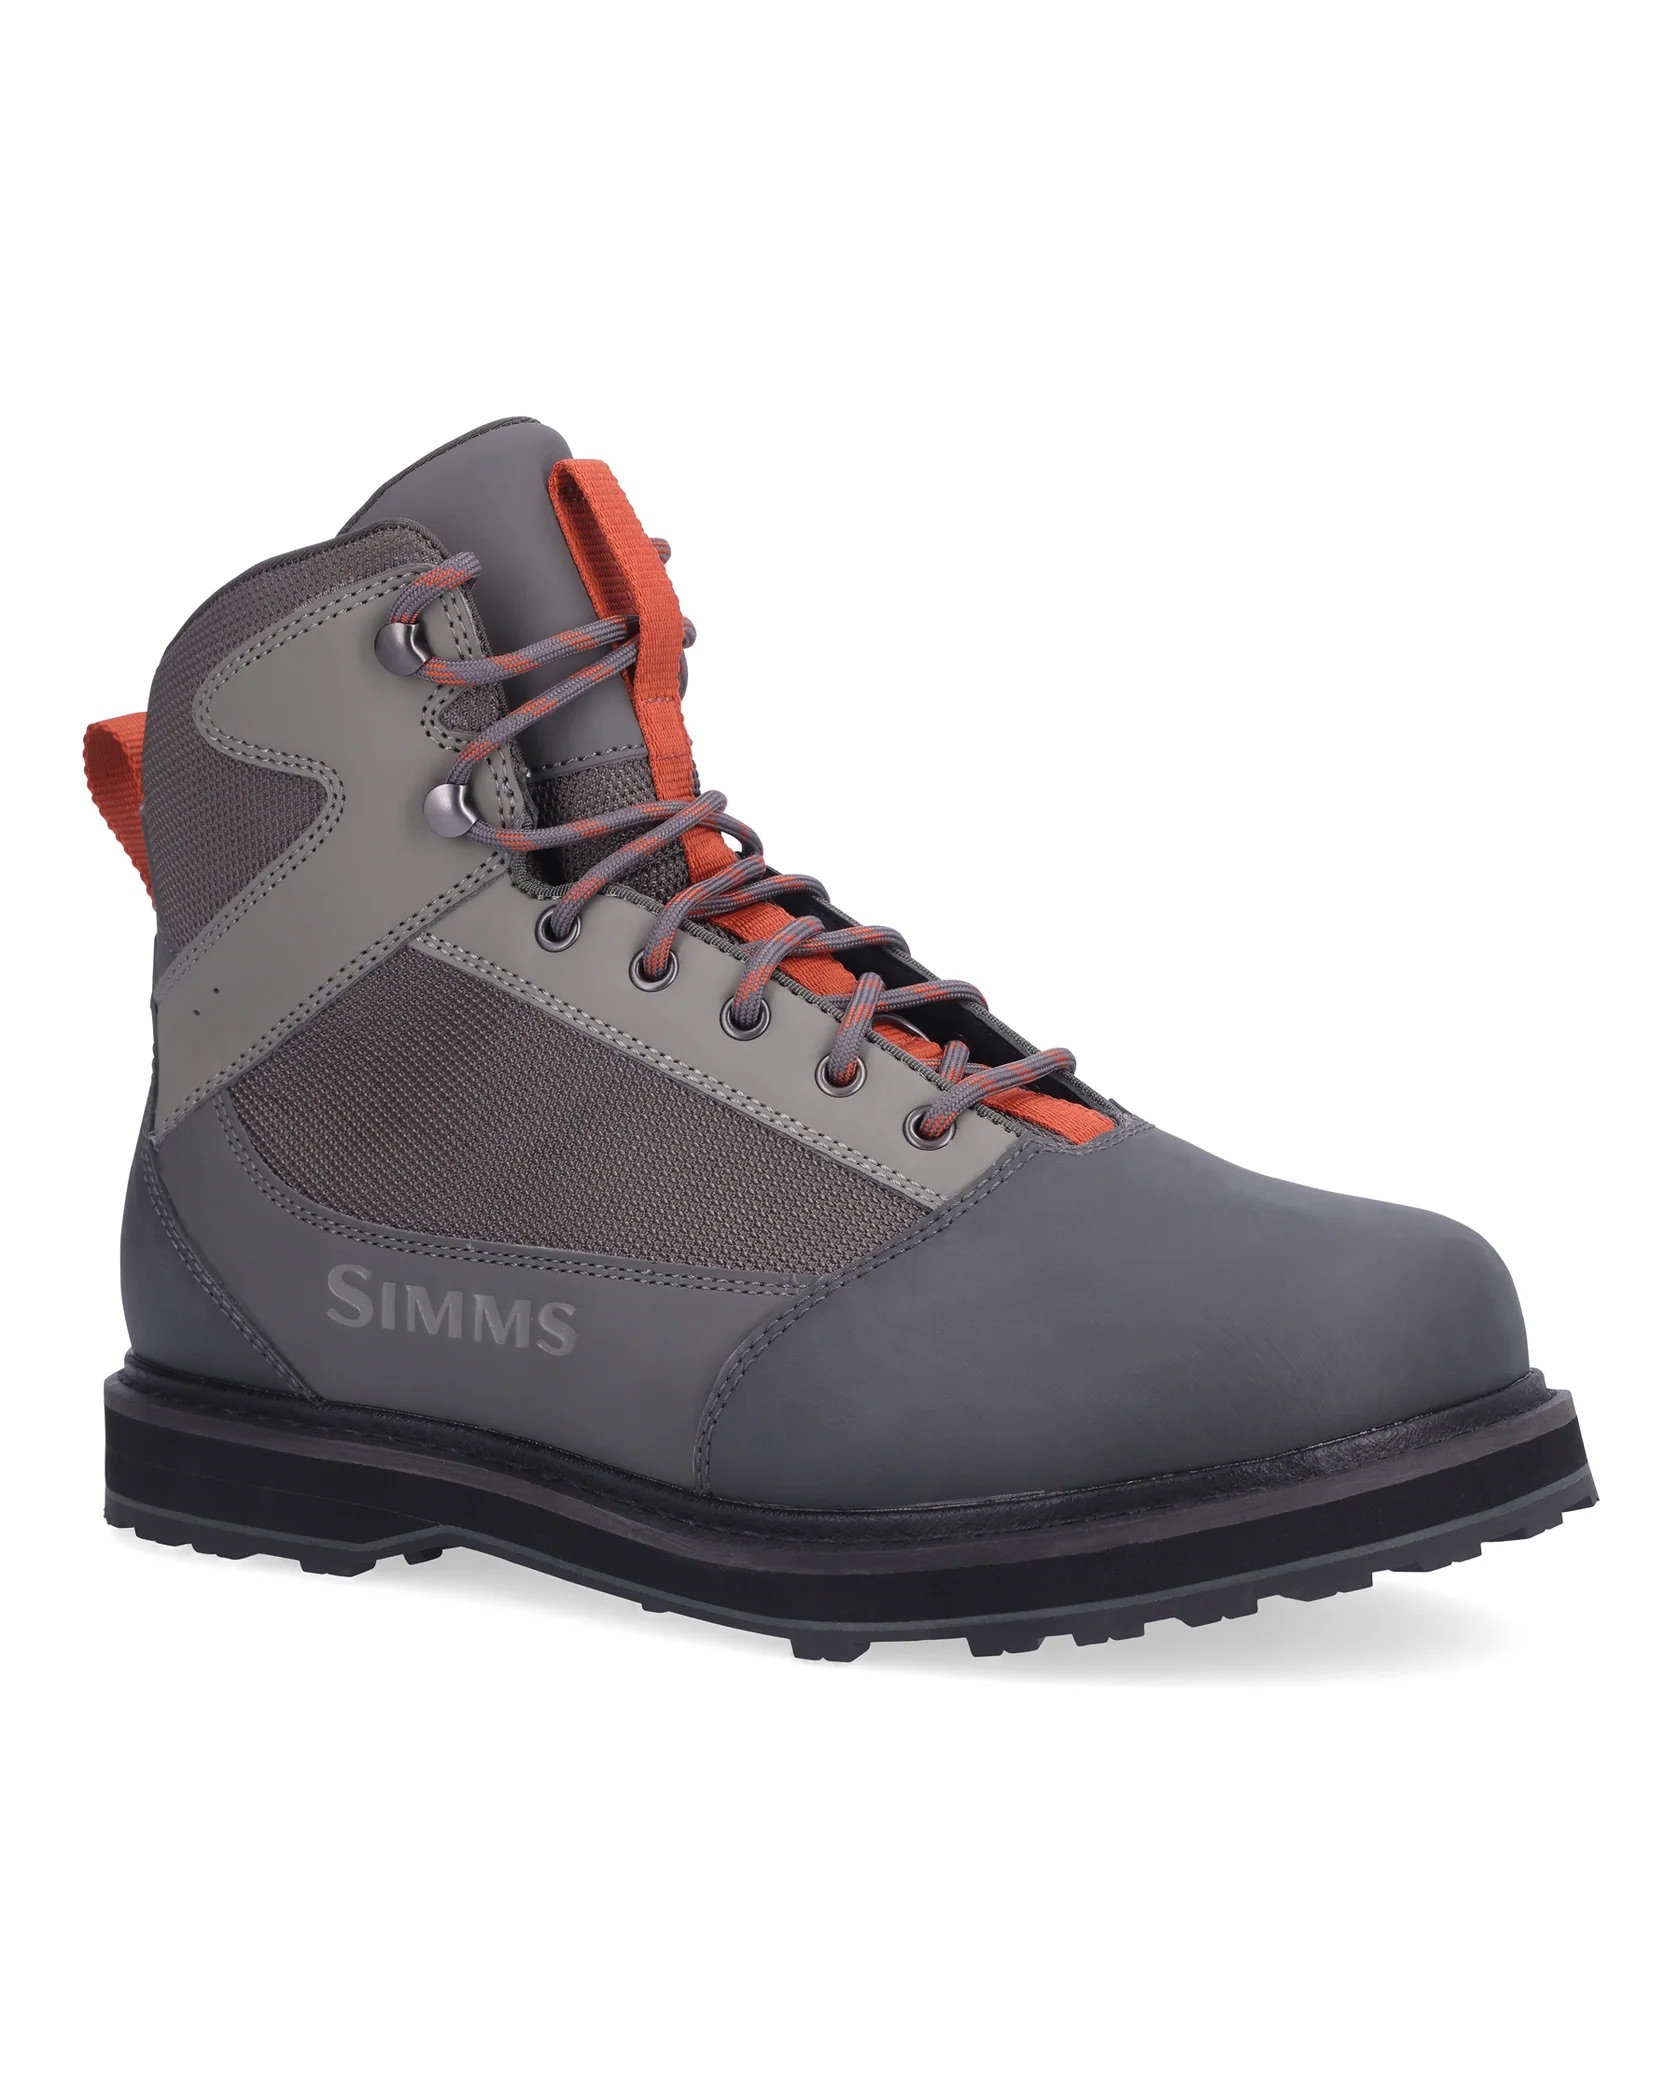 Simms Tributary Wading Boot - Rubber - Size 5